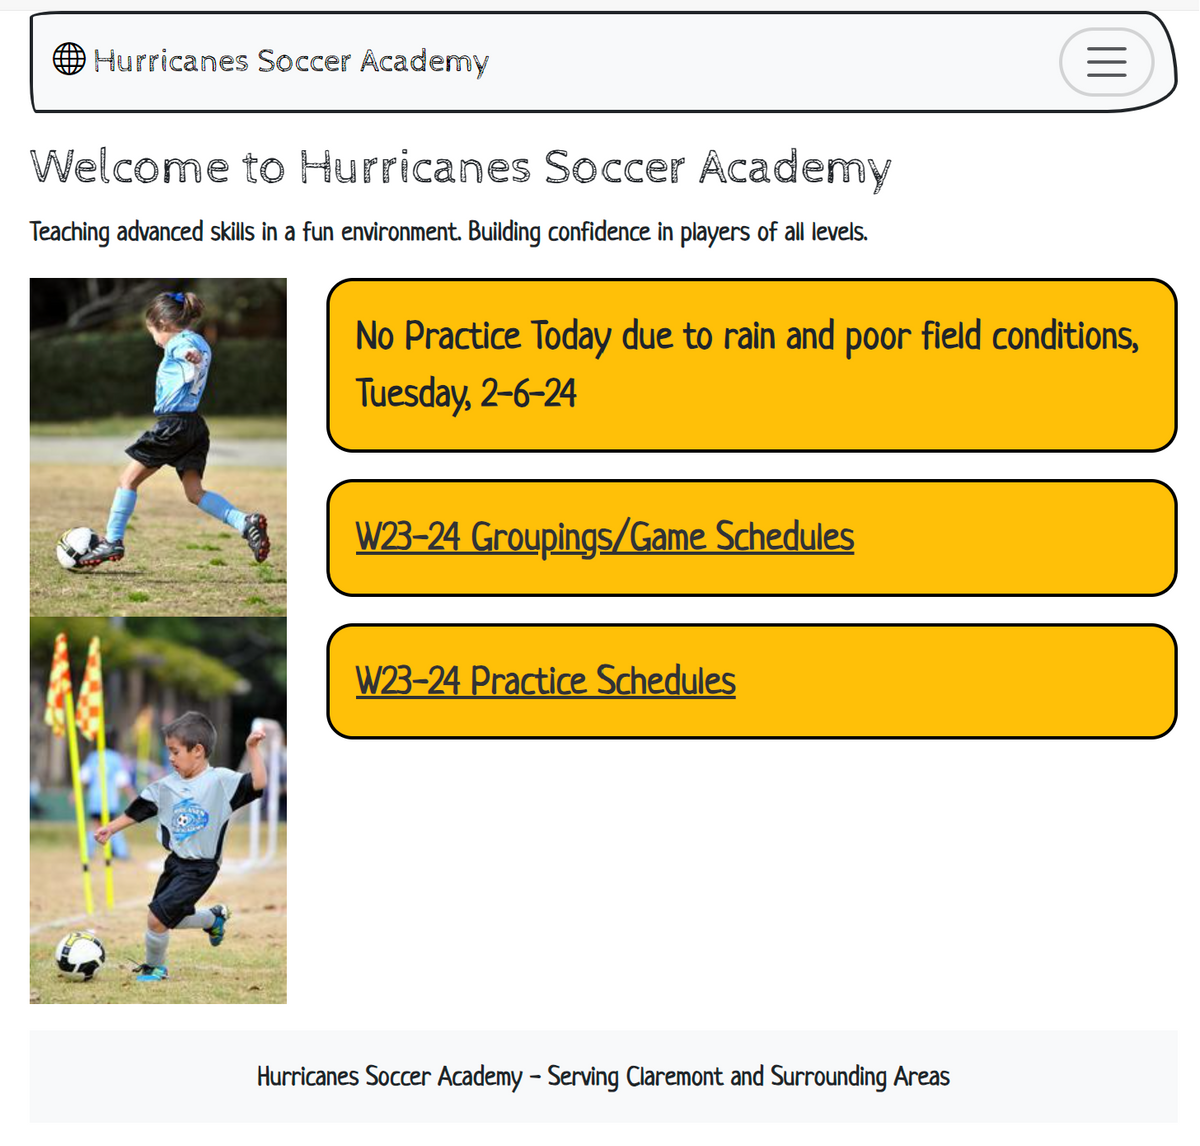 Hurricanes Soccer Academy
Welcome to Hurricanes Soccer Academy
Teaching advanced skills in a fun environment. Building confidence in players of all levels.
No Practice Today due to rain and poor field conditions,
Tuesday, 2-6-24
W23-24 Groupings/Game Schedules
W23-24 Practice Schedules
|||
Hurricanes Soccer Academy - Serving Claremont and Surrounding Areas